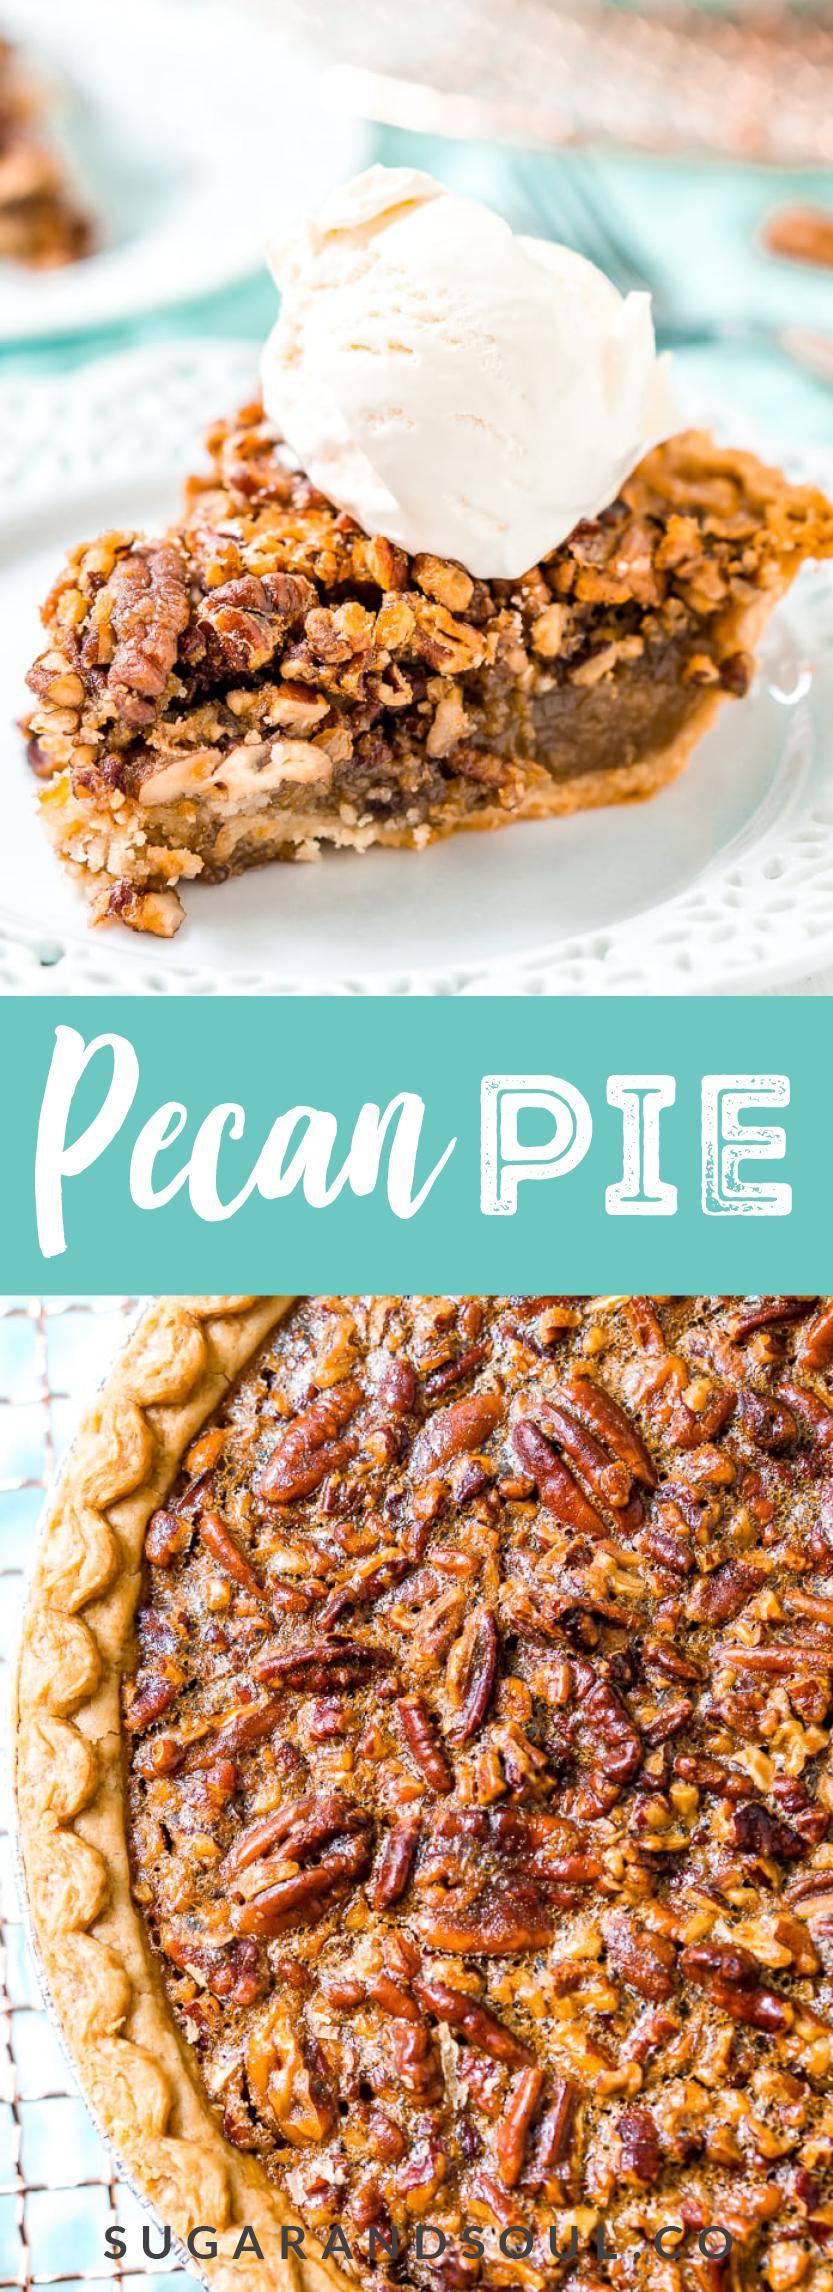 Pecan Pie is so simple to make and a delicious holiday pie the whole family will love! The sugar filling is loaded with pecans and nestled in a flaky crust and you can easily make it a day or two ahead of time! via @sugarandsoulco